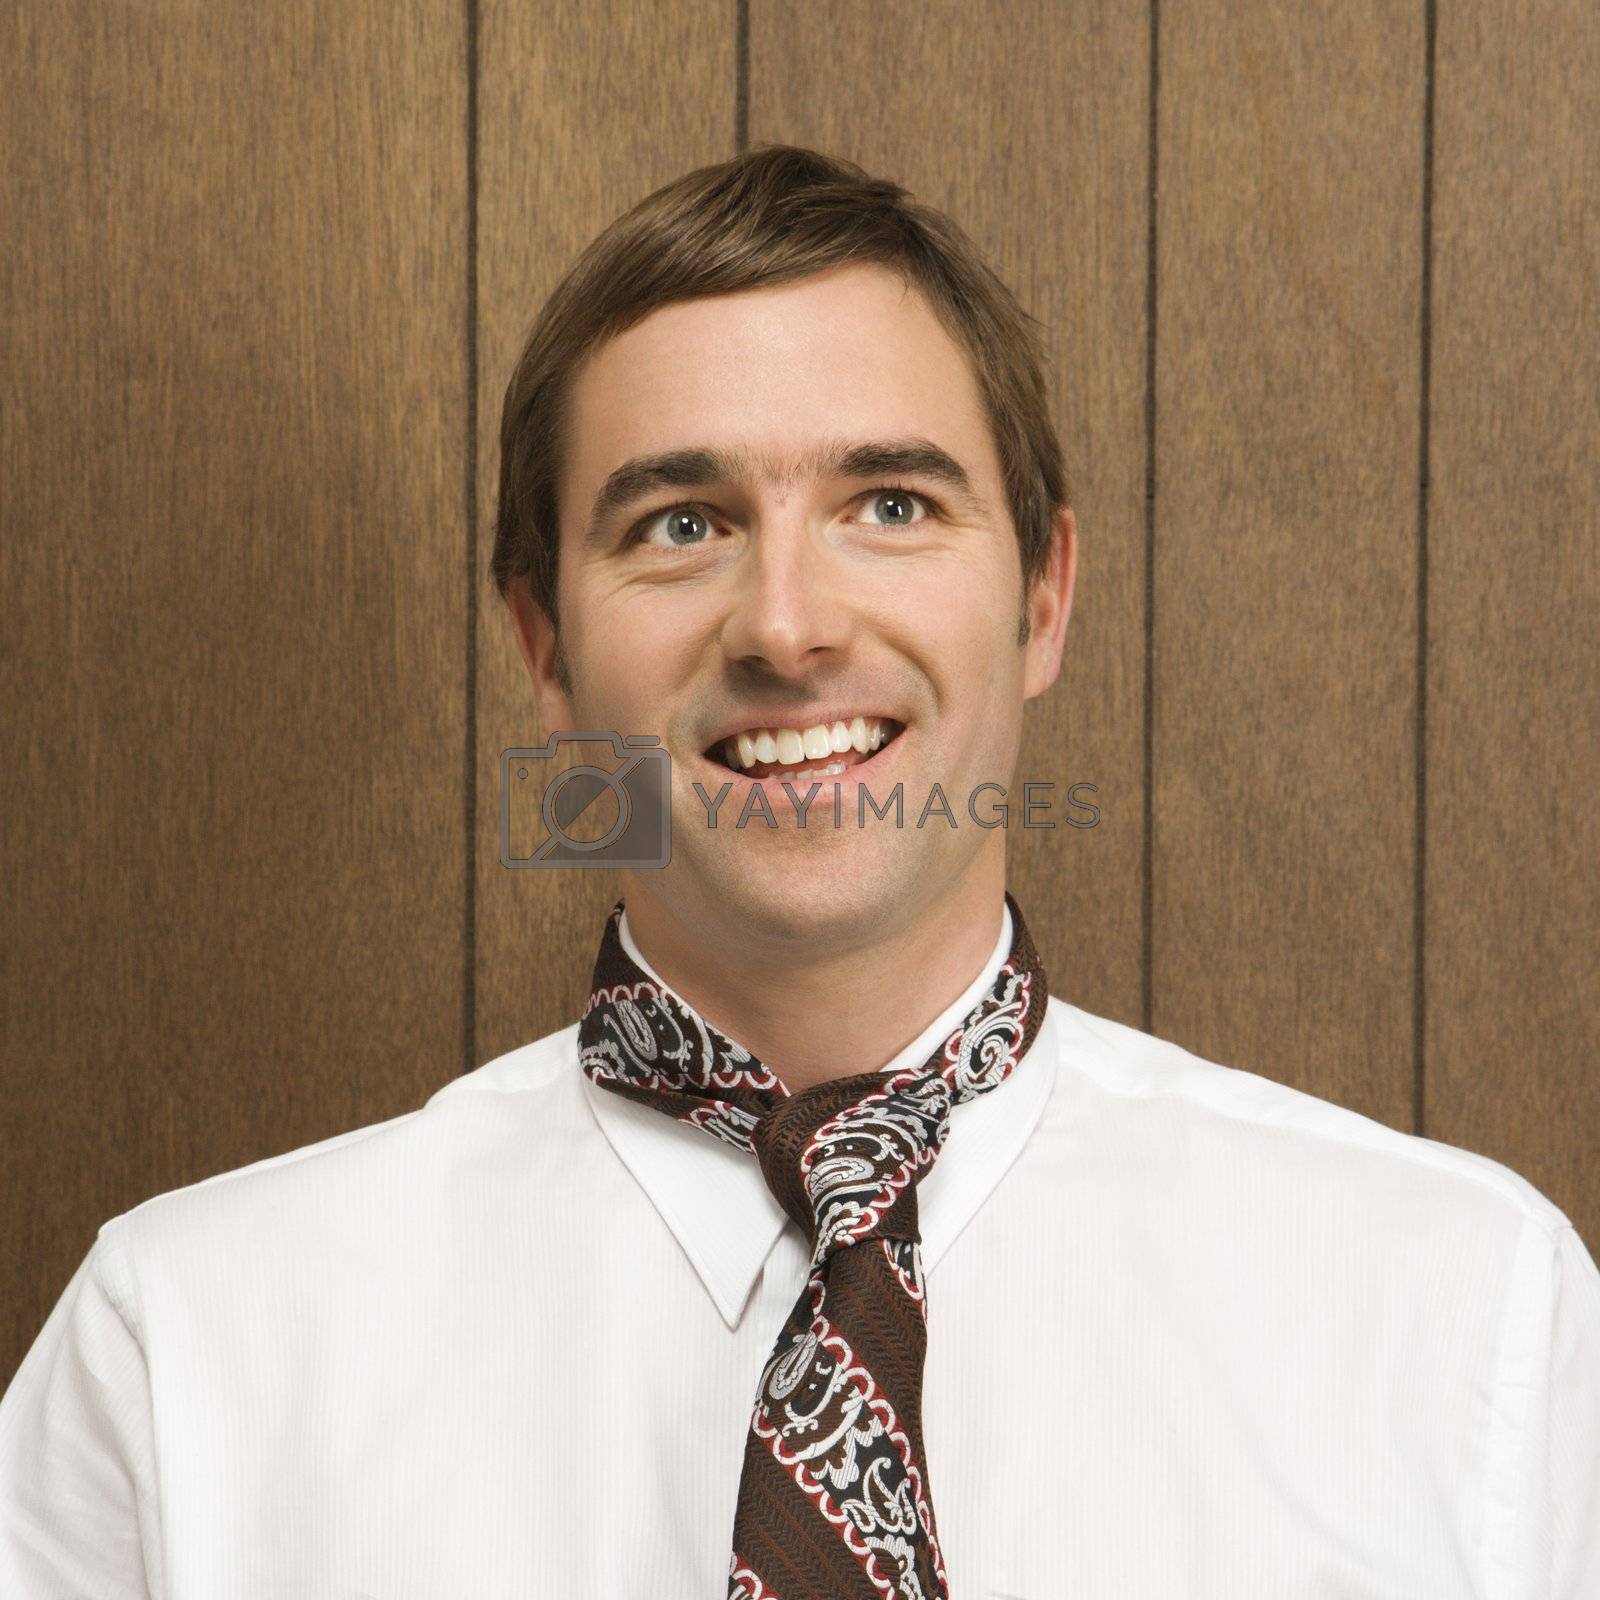 Royalty free image of Man wearing necktie. by iofoto